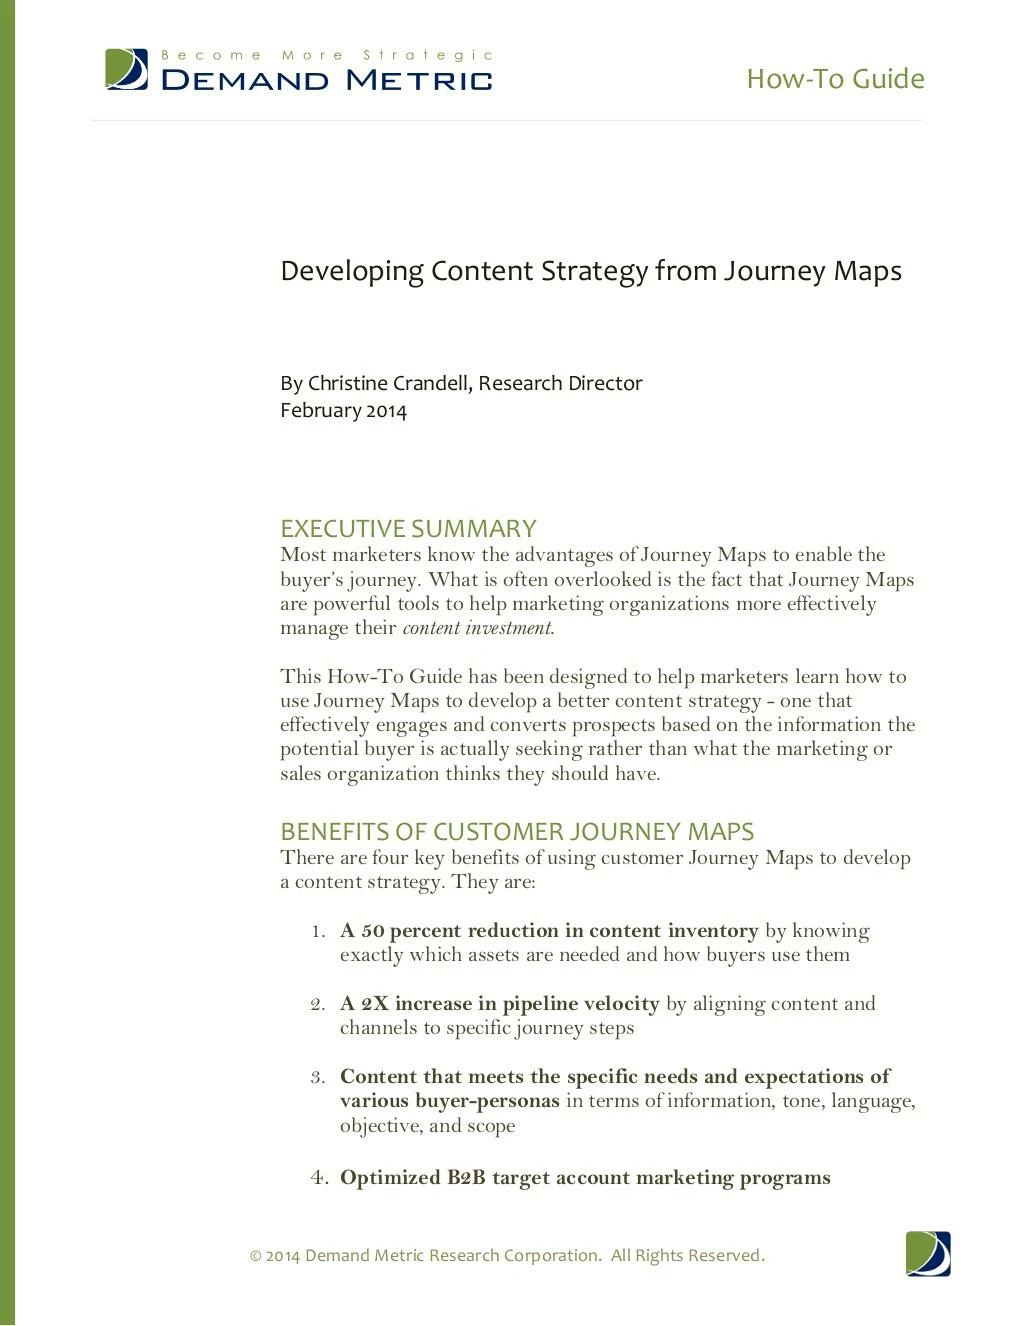 how to guide developing content strategy from journey maps